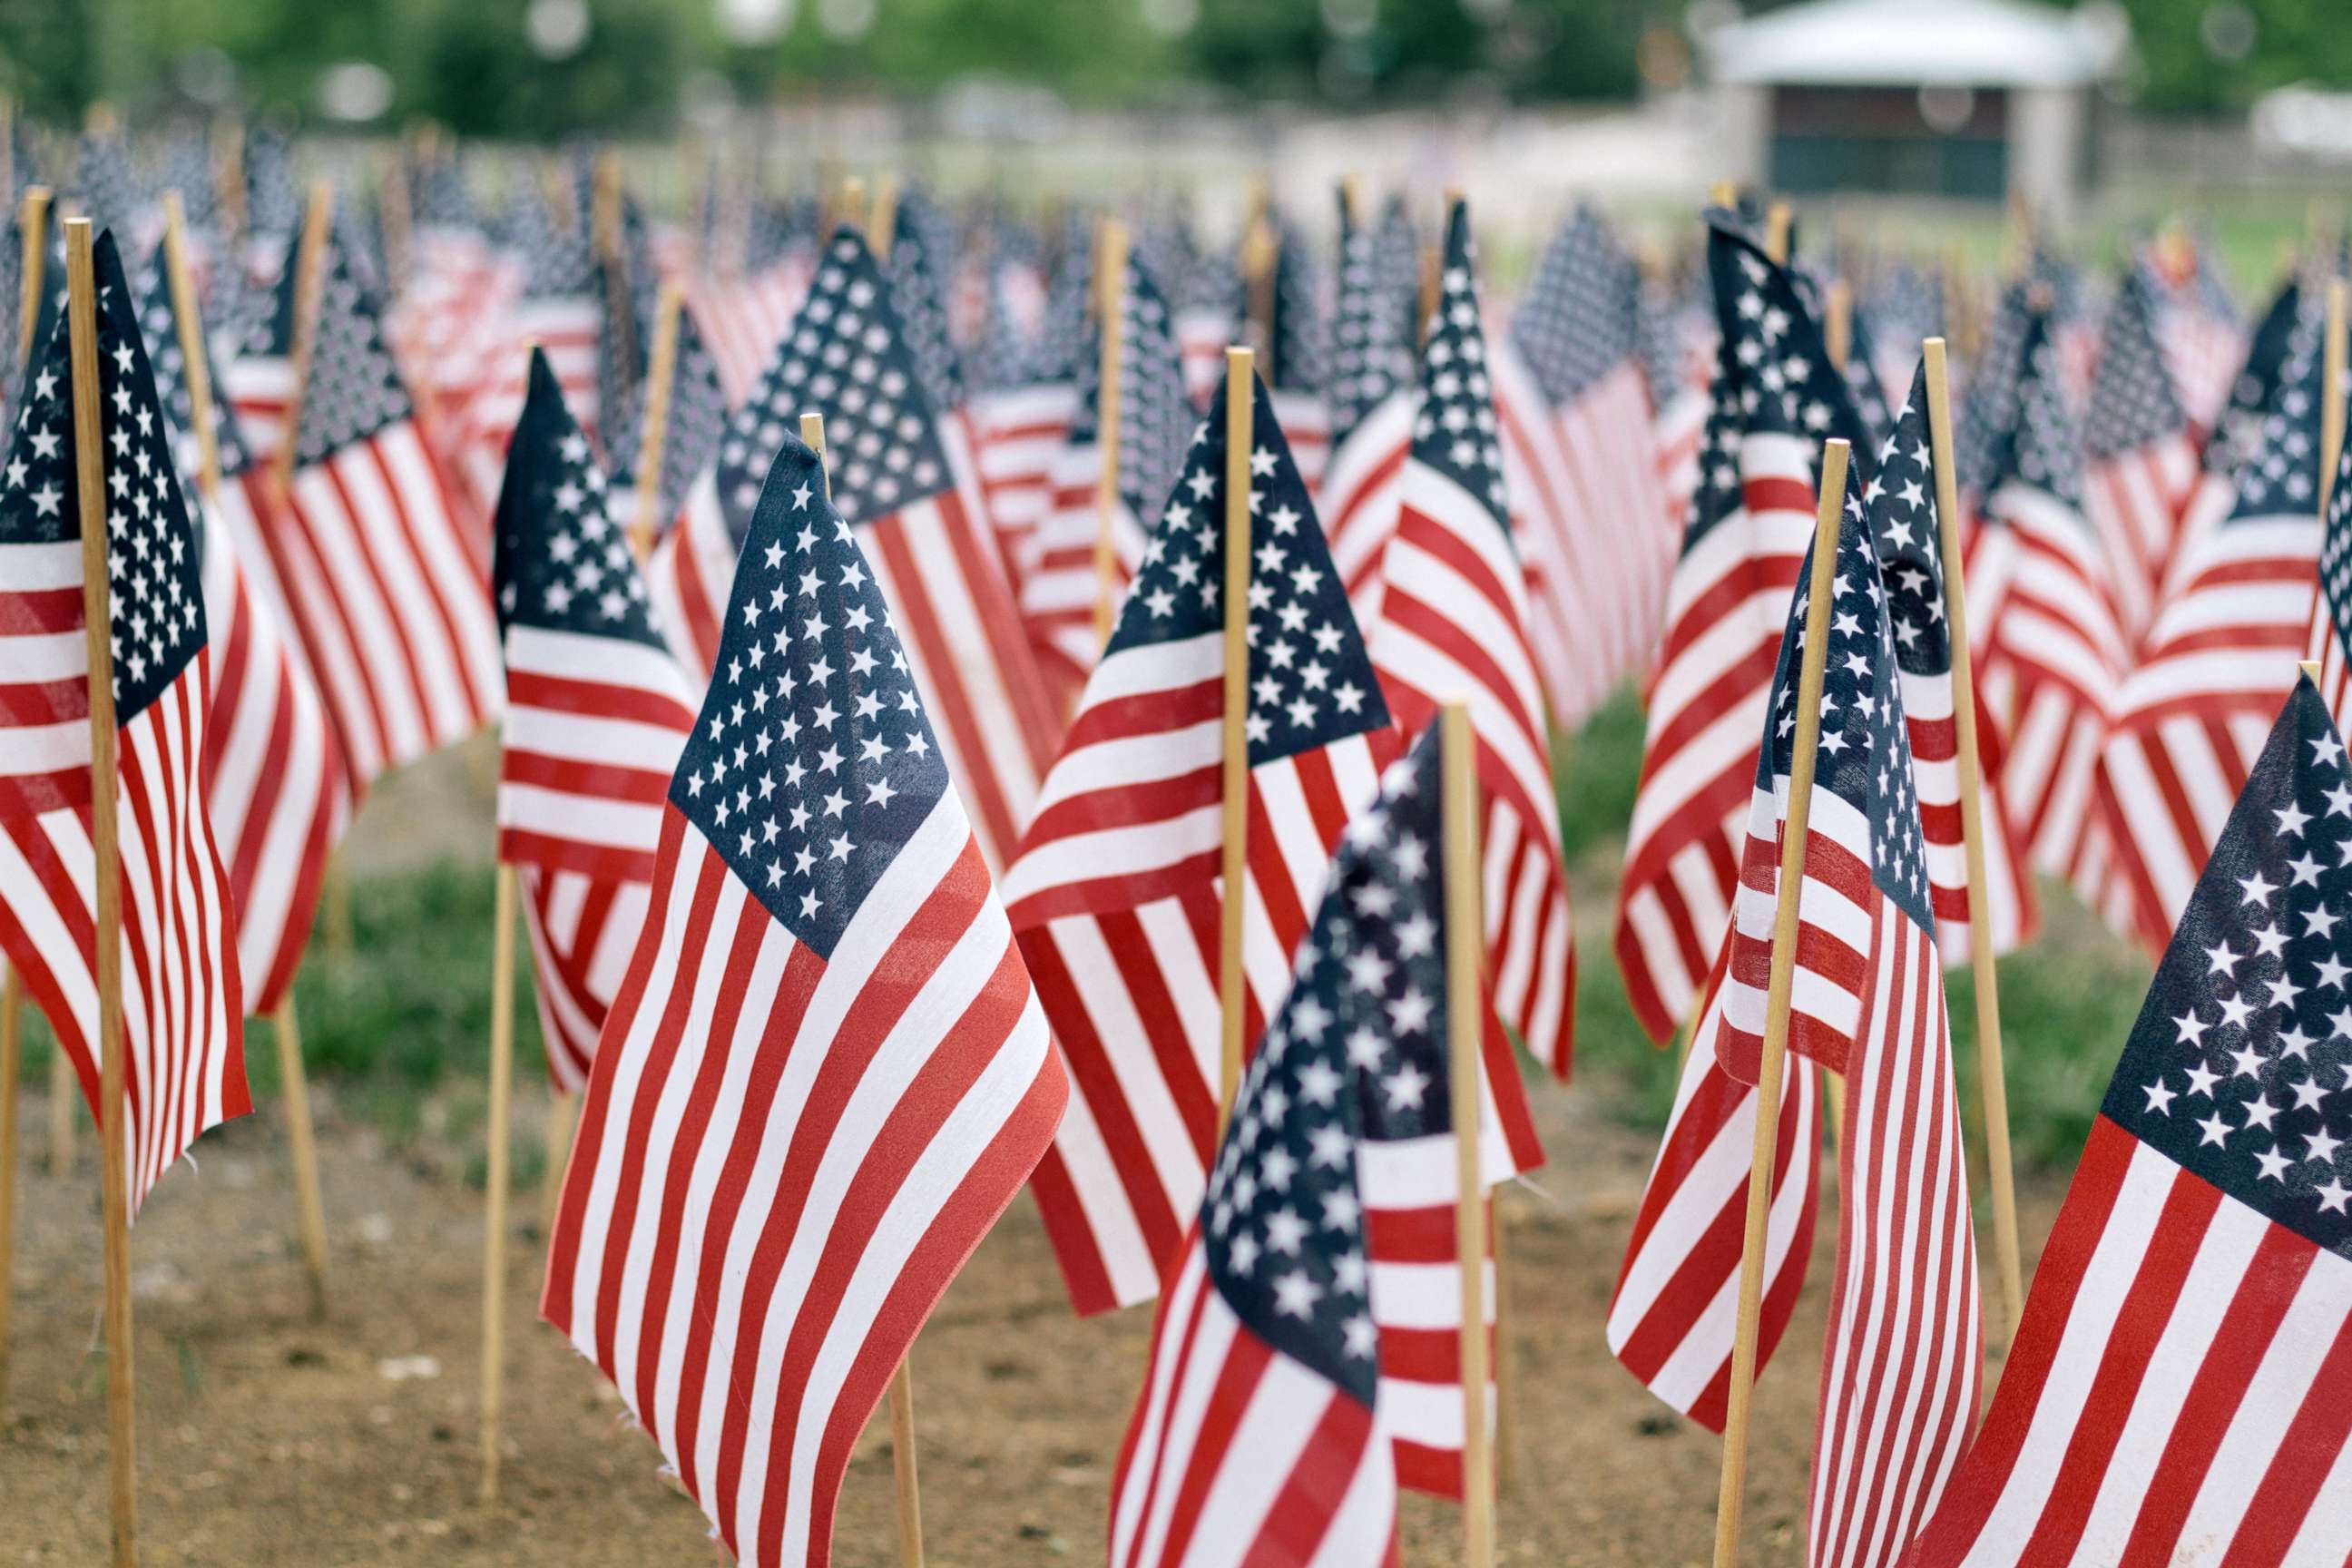 PHOTO: US flags are seen in this undated stock photo.